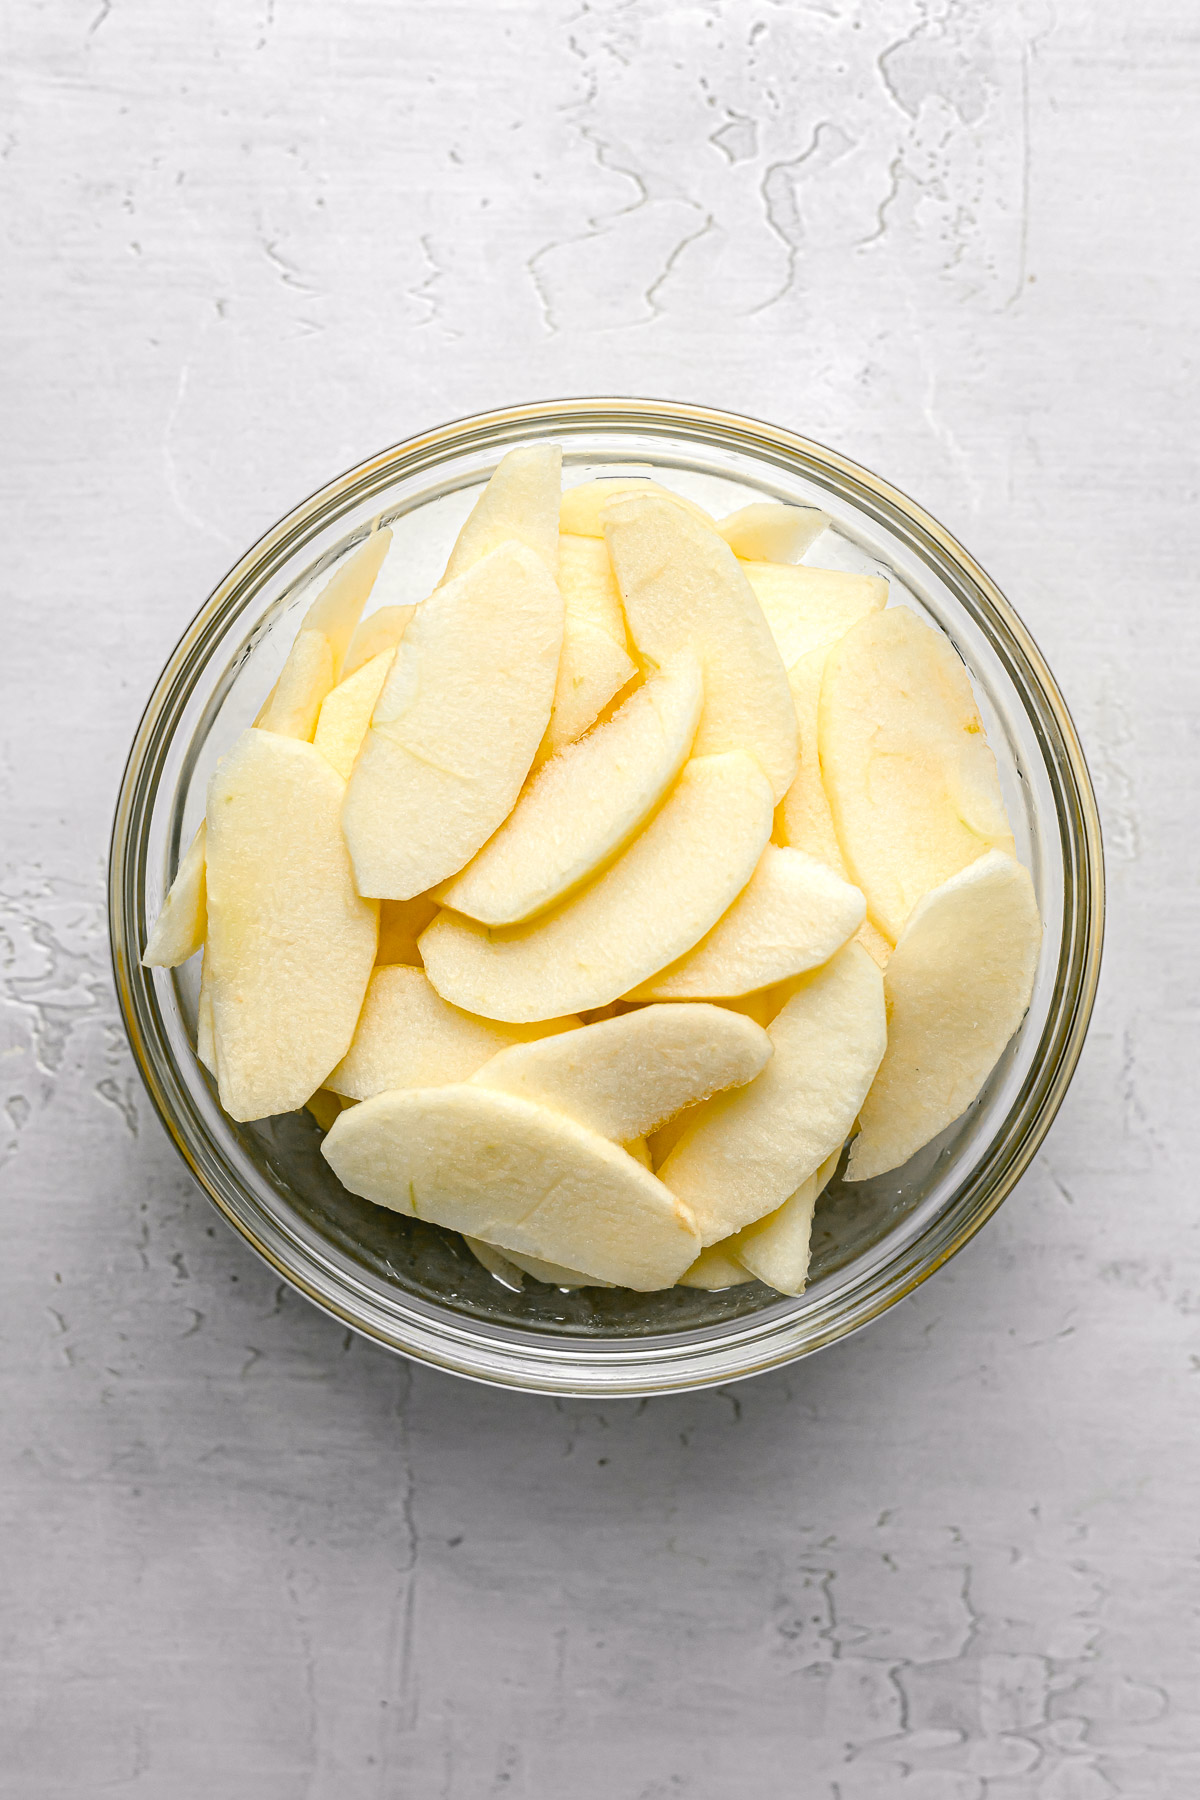 apple slices in glass bowl